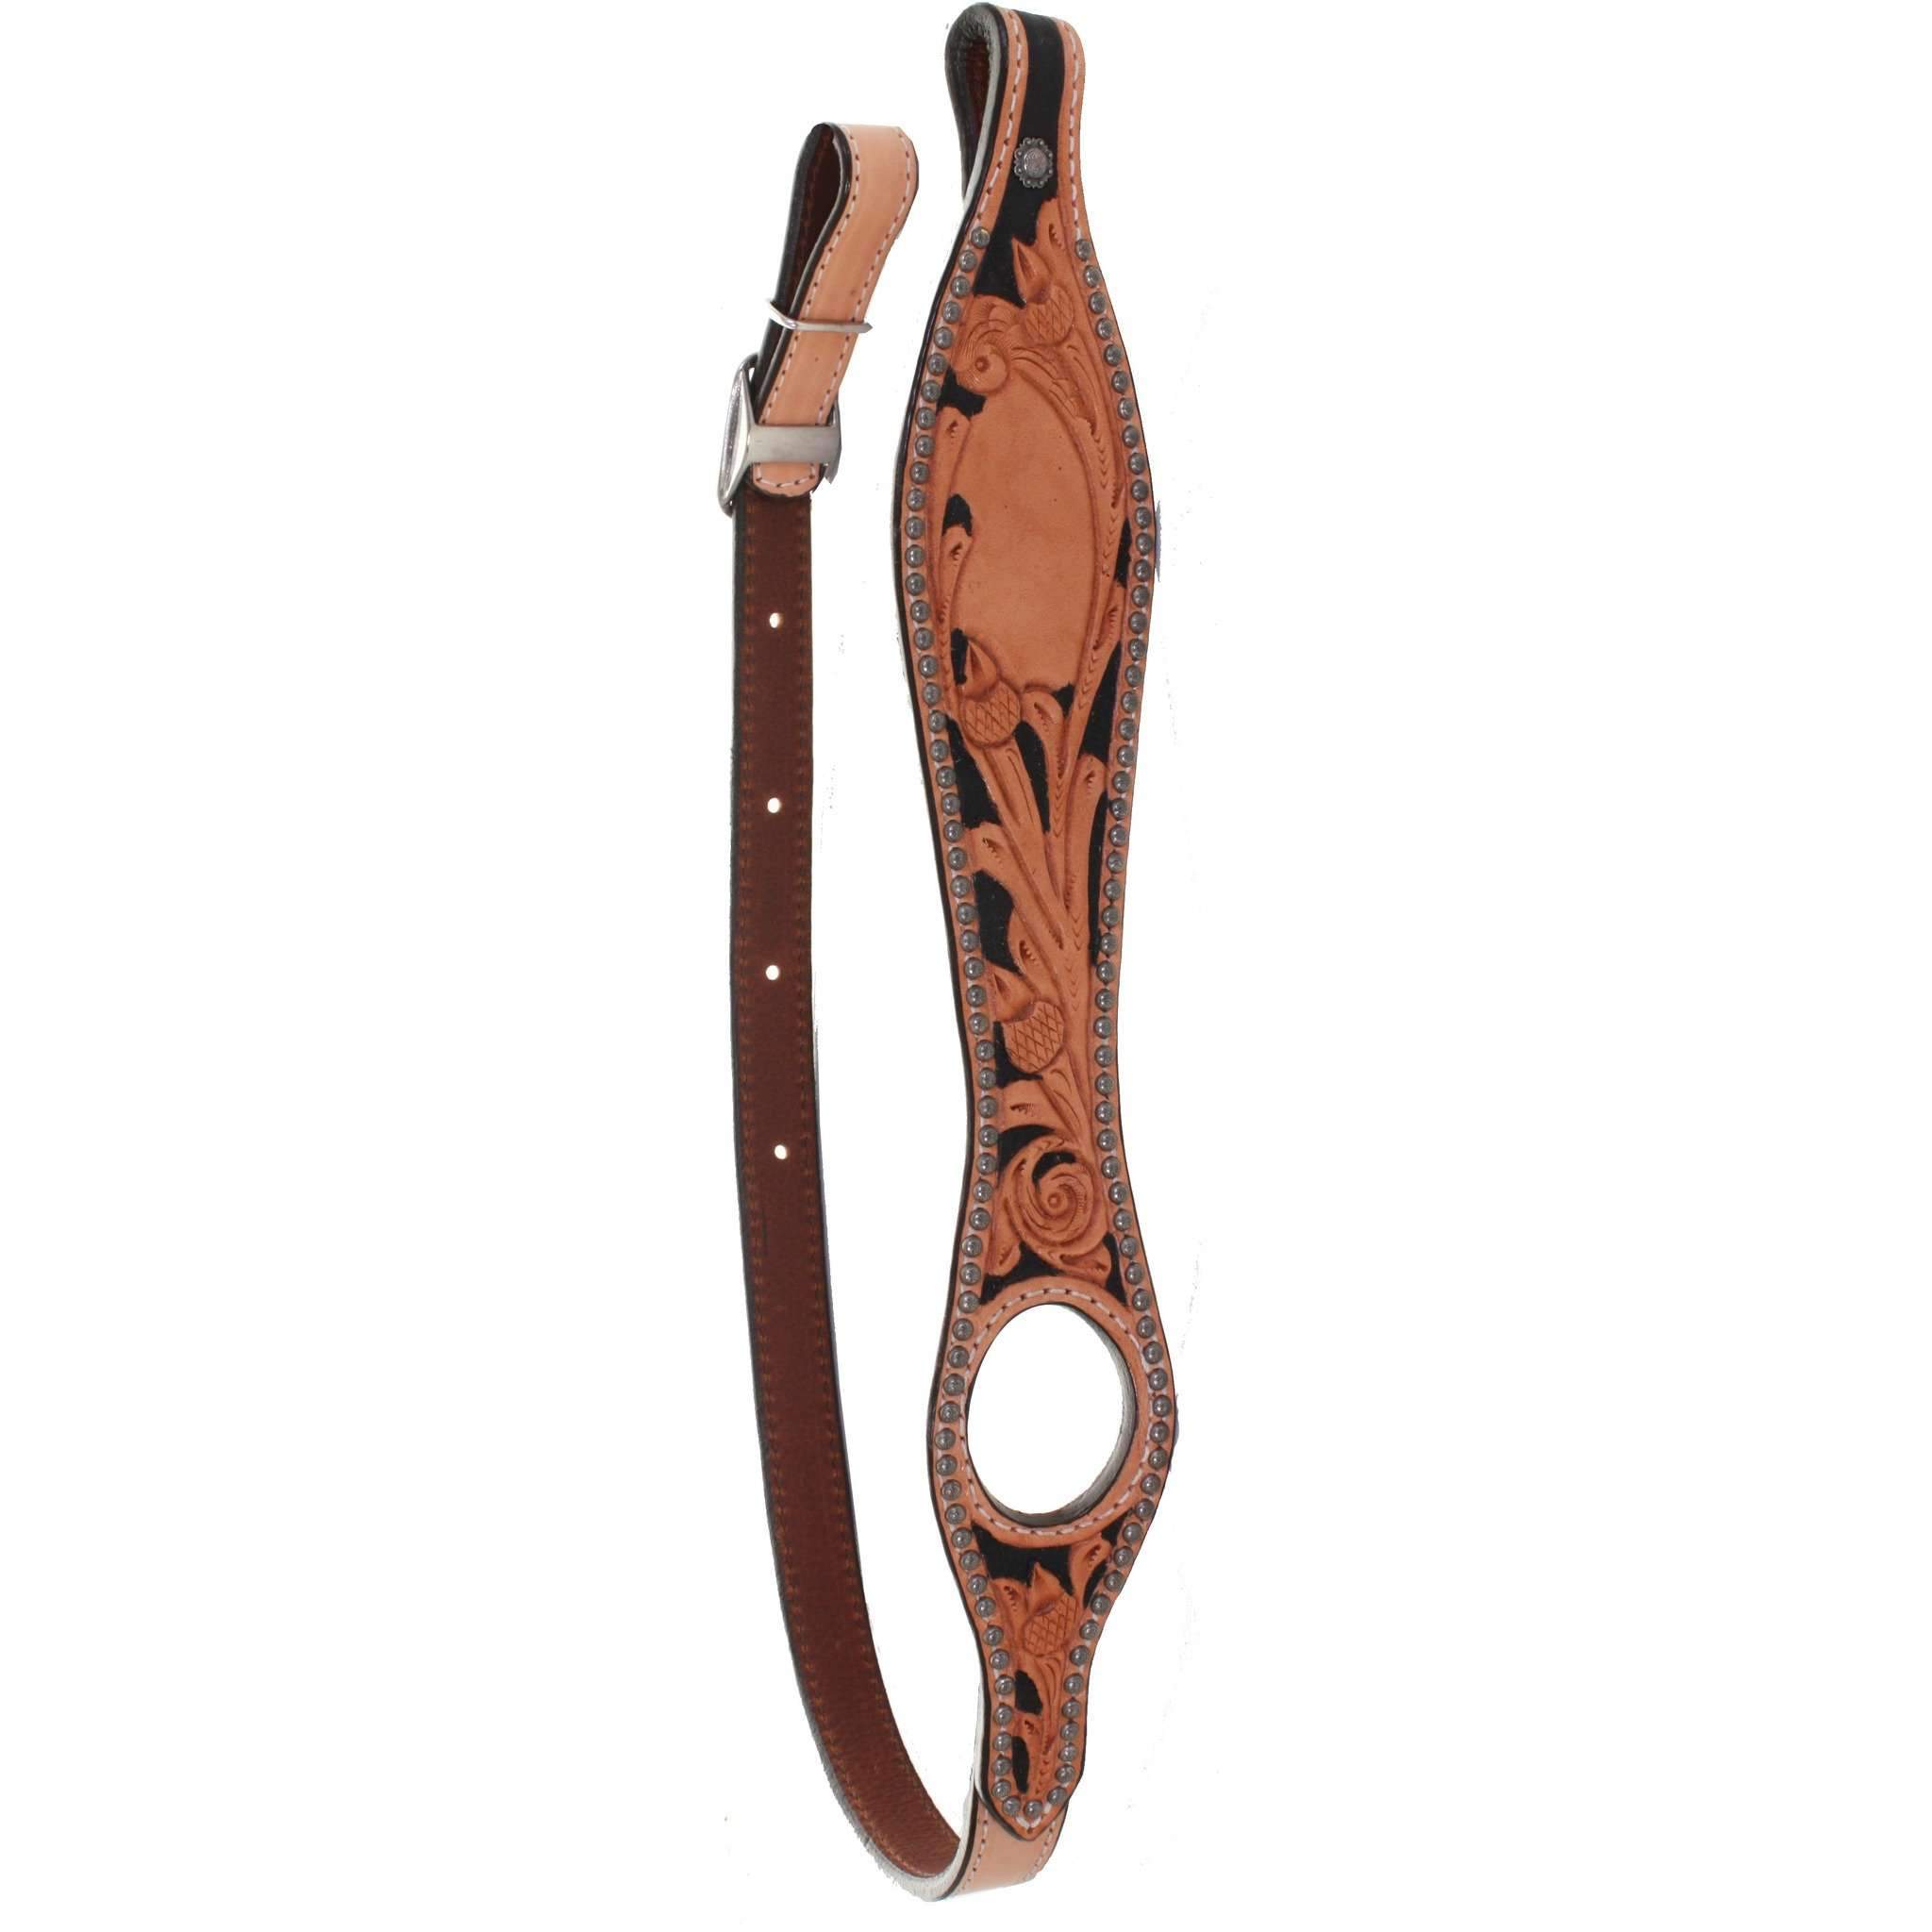 GS06 - Black Roan Cowhide and Hand-Tooled Leather Gun Sling - Double J  Saddlery